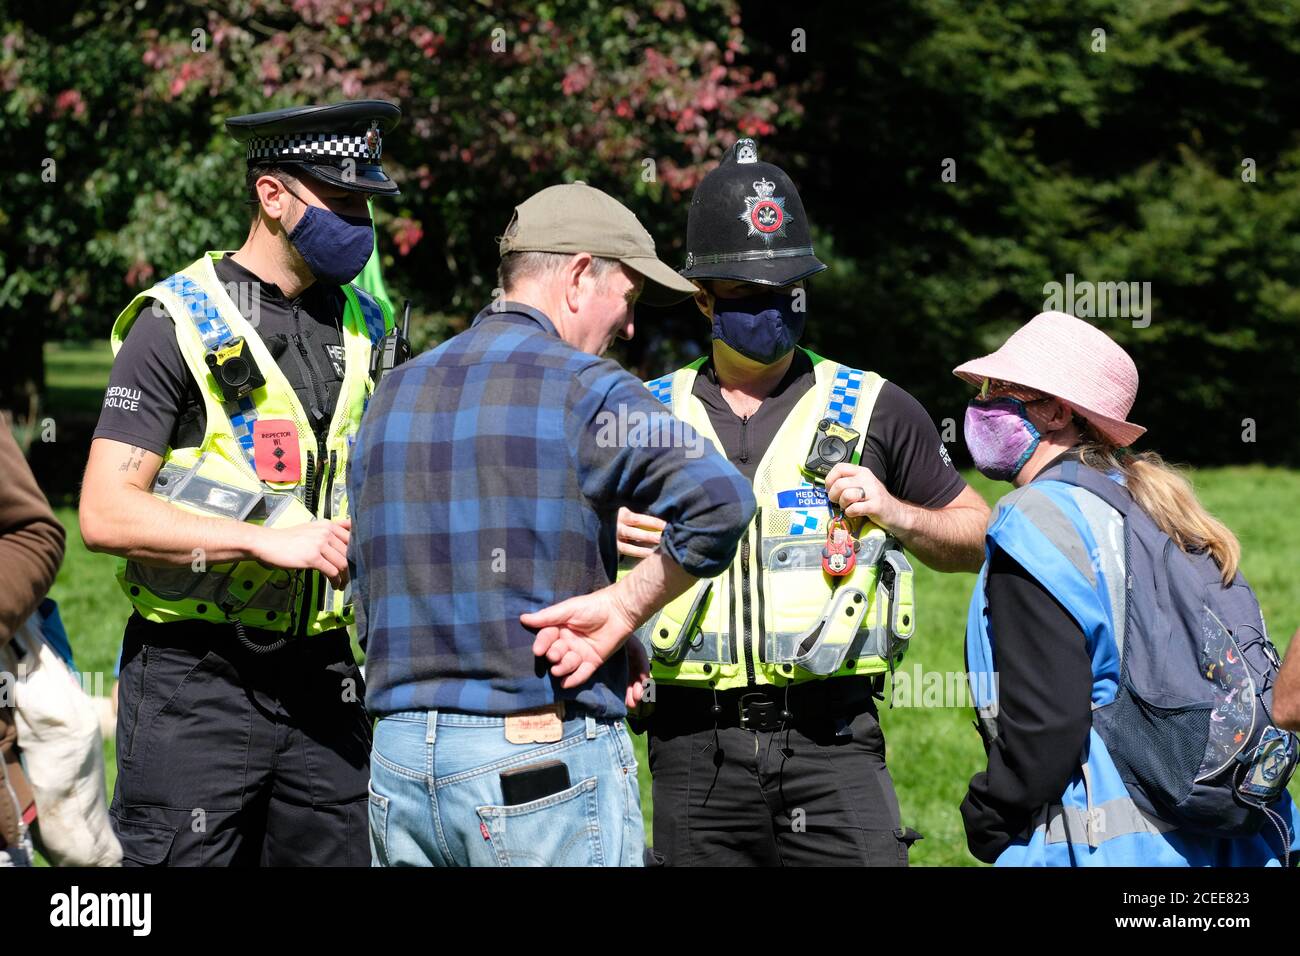 Cardiff, Wales, UK - Tuesday 1st September 2020 - Extinction Rebellion ( XR ) protesters and Police engage as rebels gather in Bute Park in Cardiff to hear speeches prior to marching. XR have set up a base camp outside Cardiff City Hall in preparation for a week of action protesting against climate change and the future of society. Photo Steven May / Alamy Live News Stock Photo